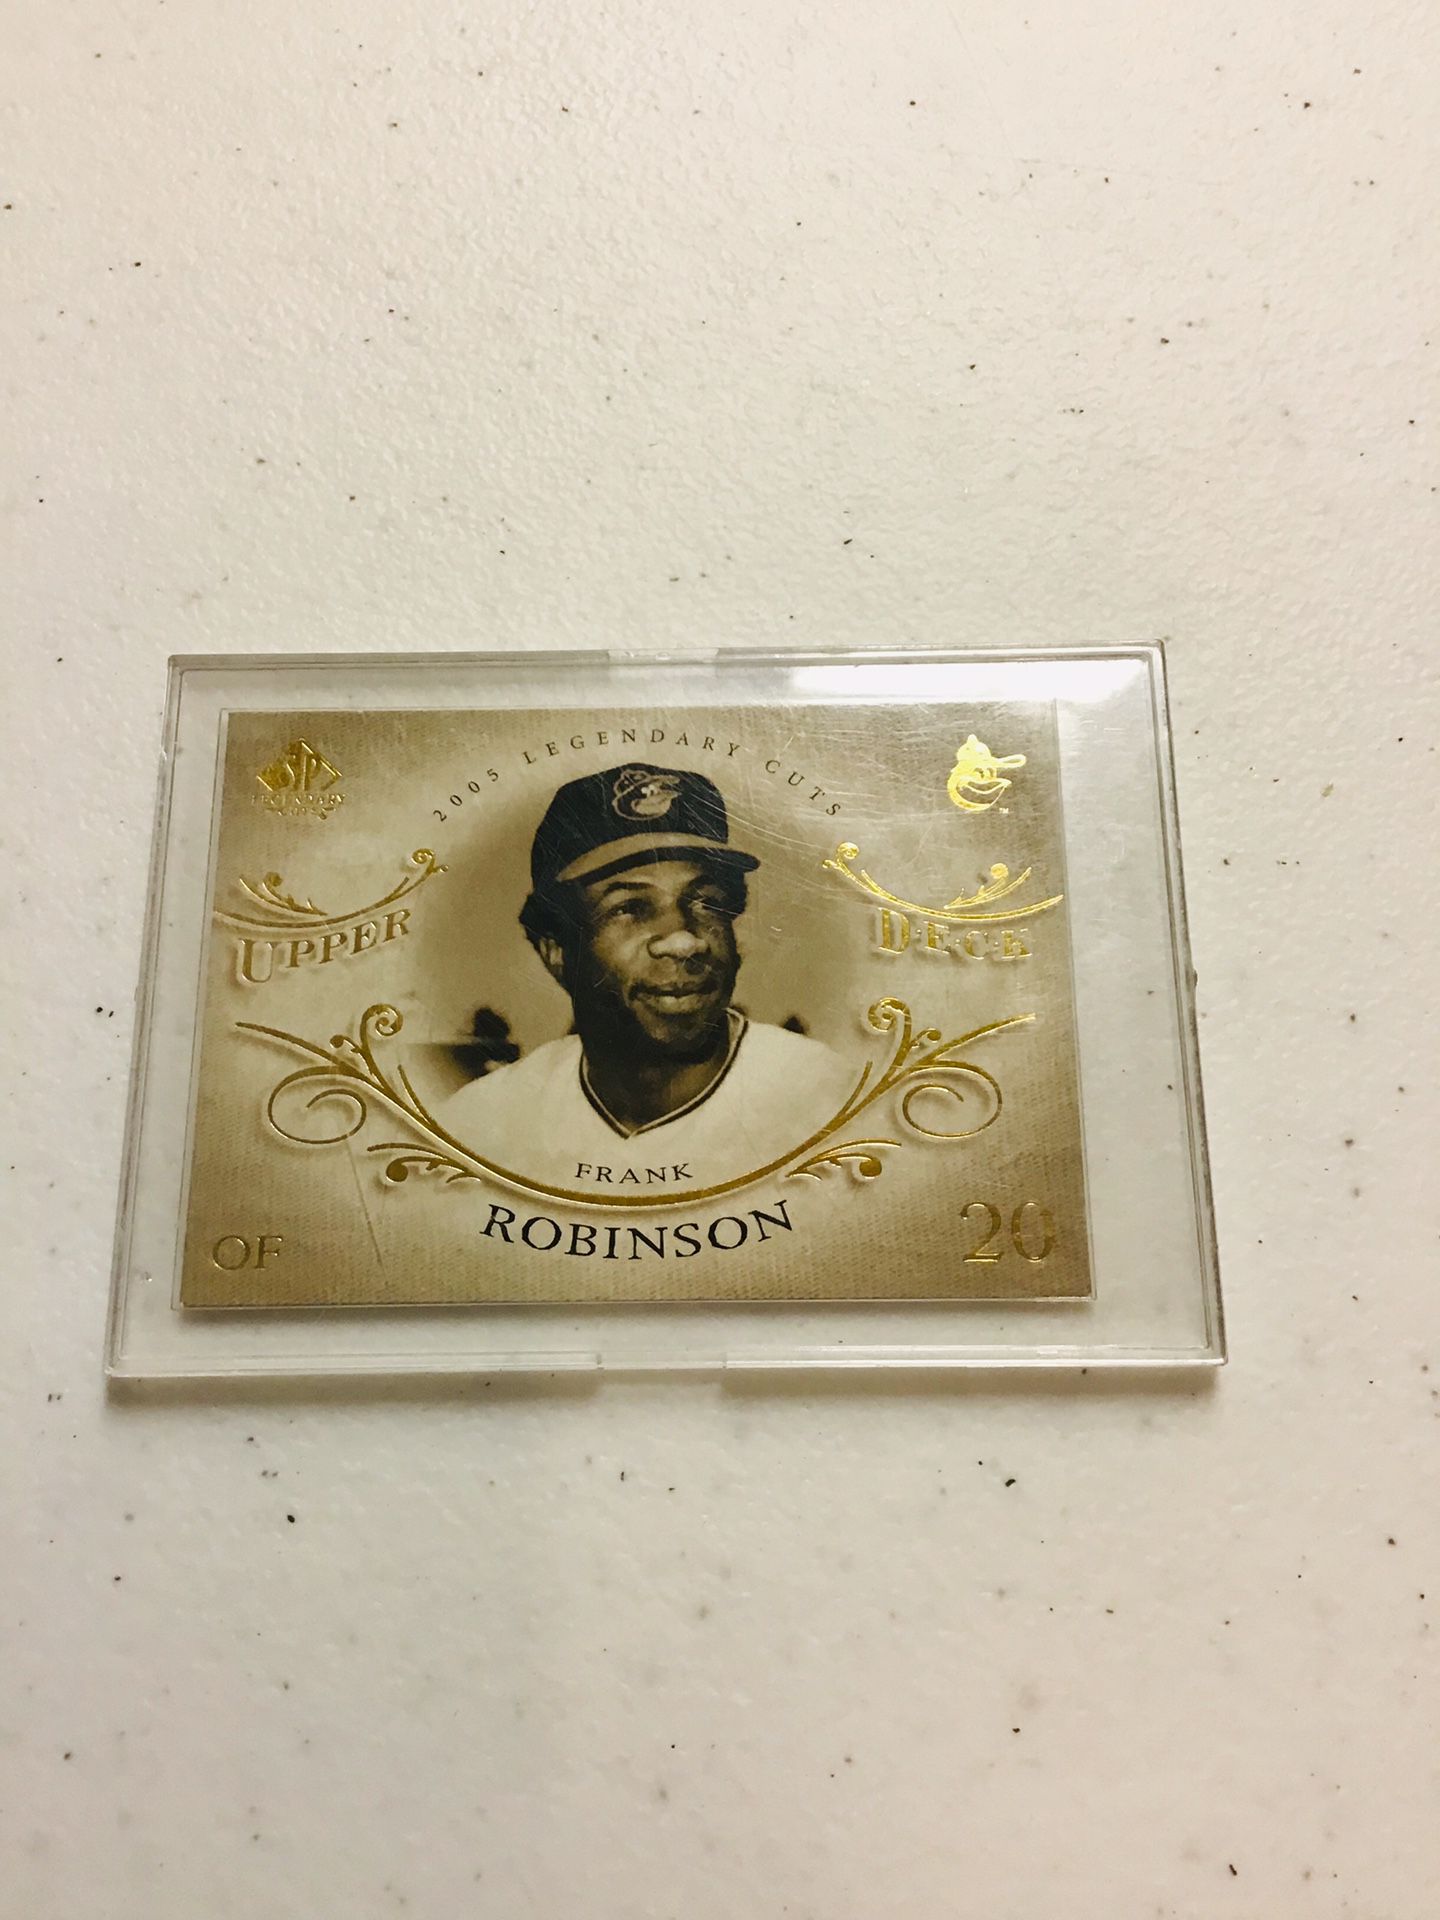 Frank Robinson baseball card in a thick project case